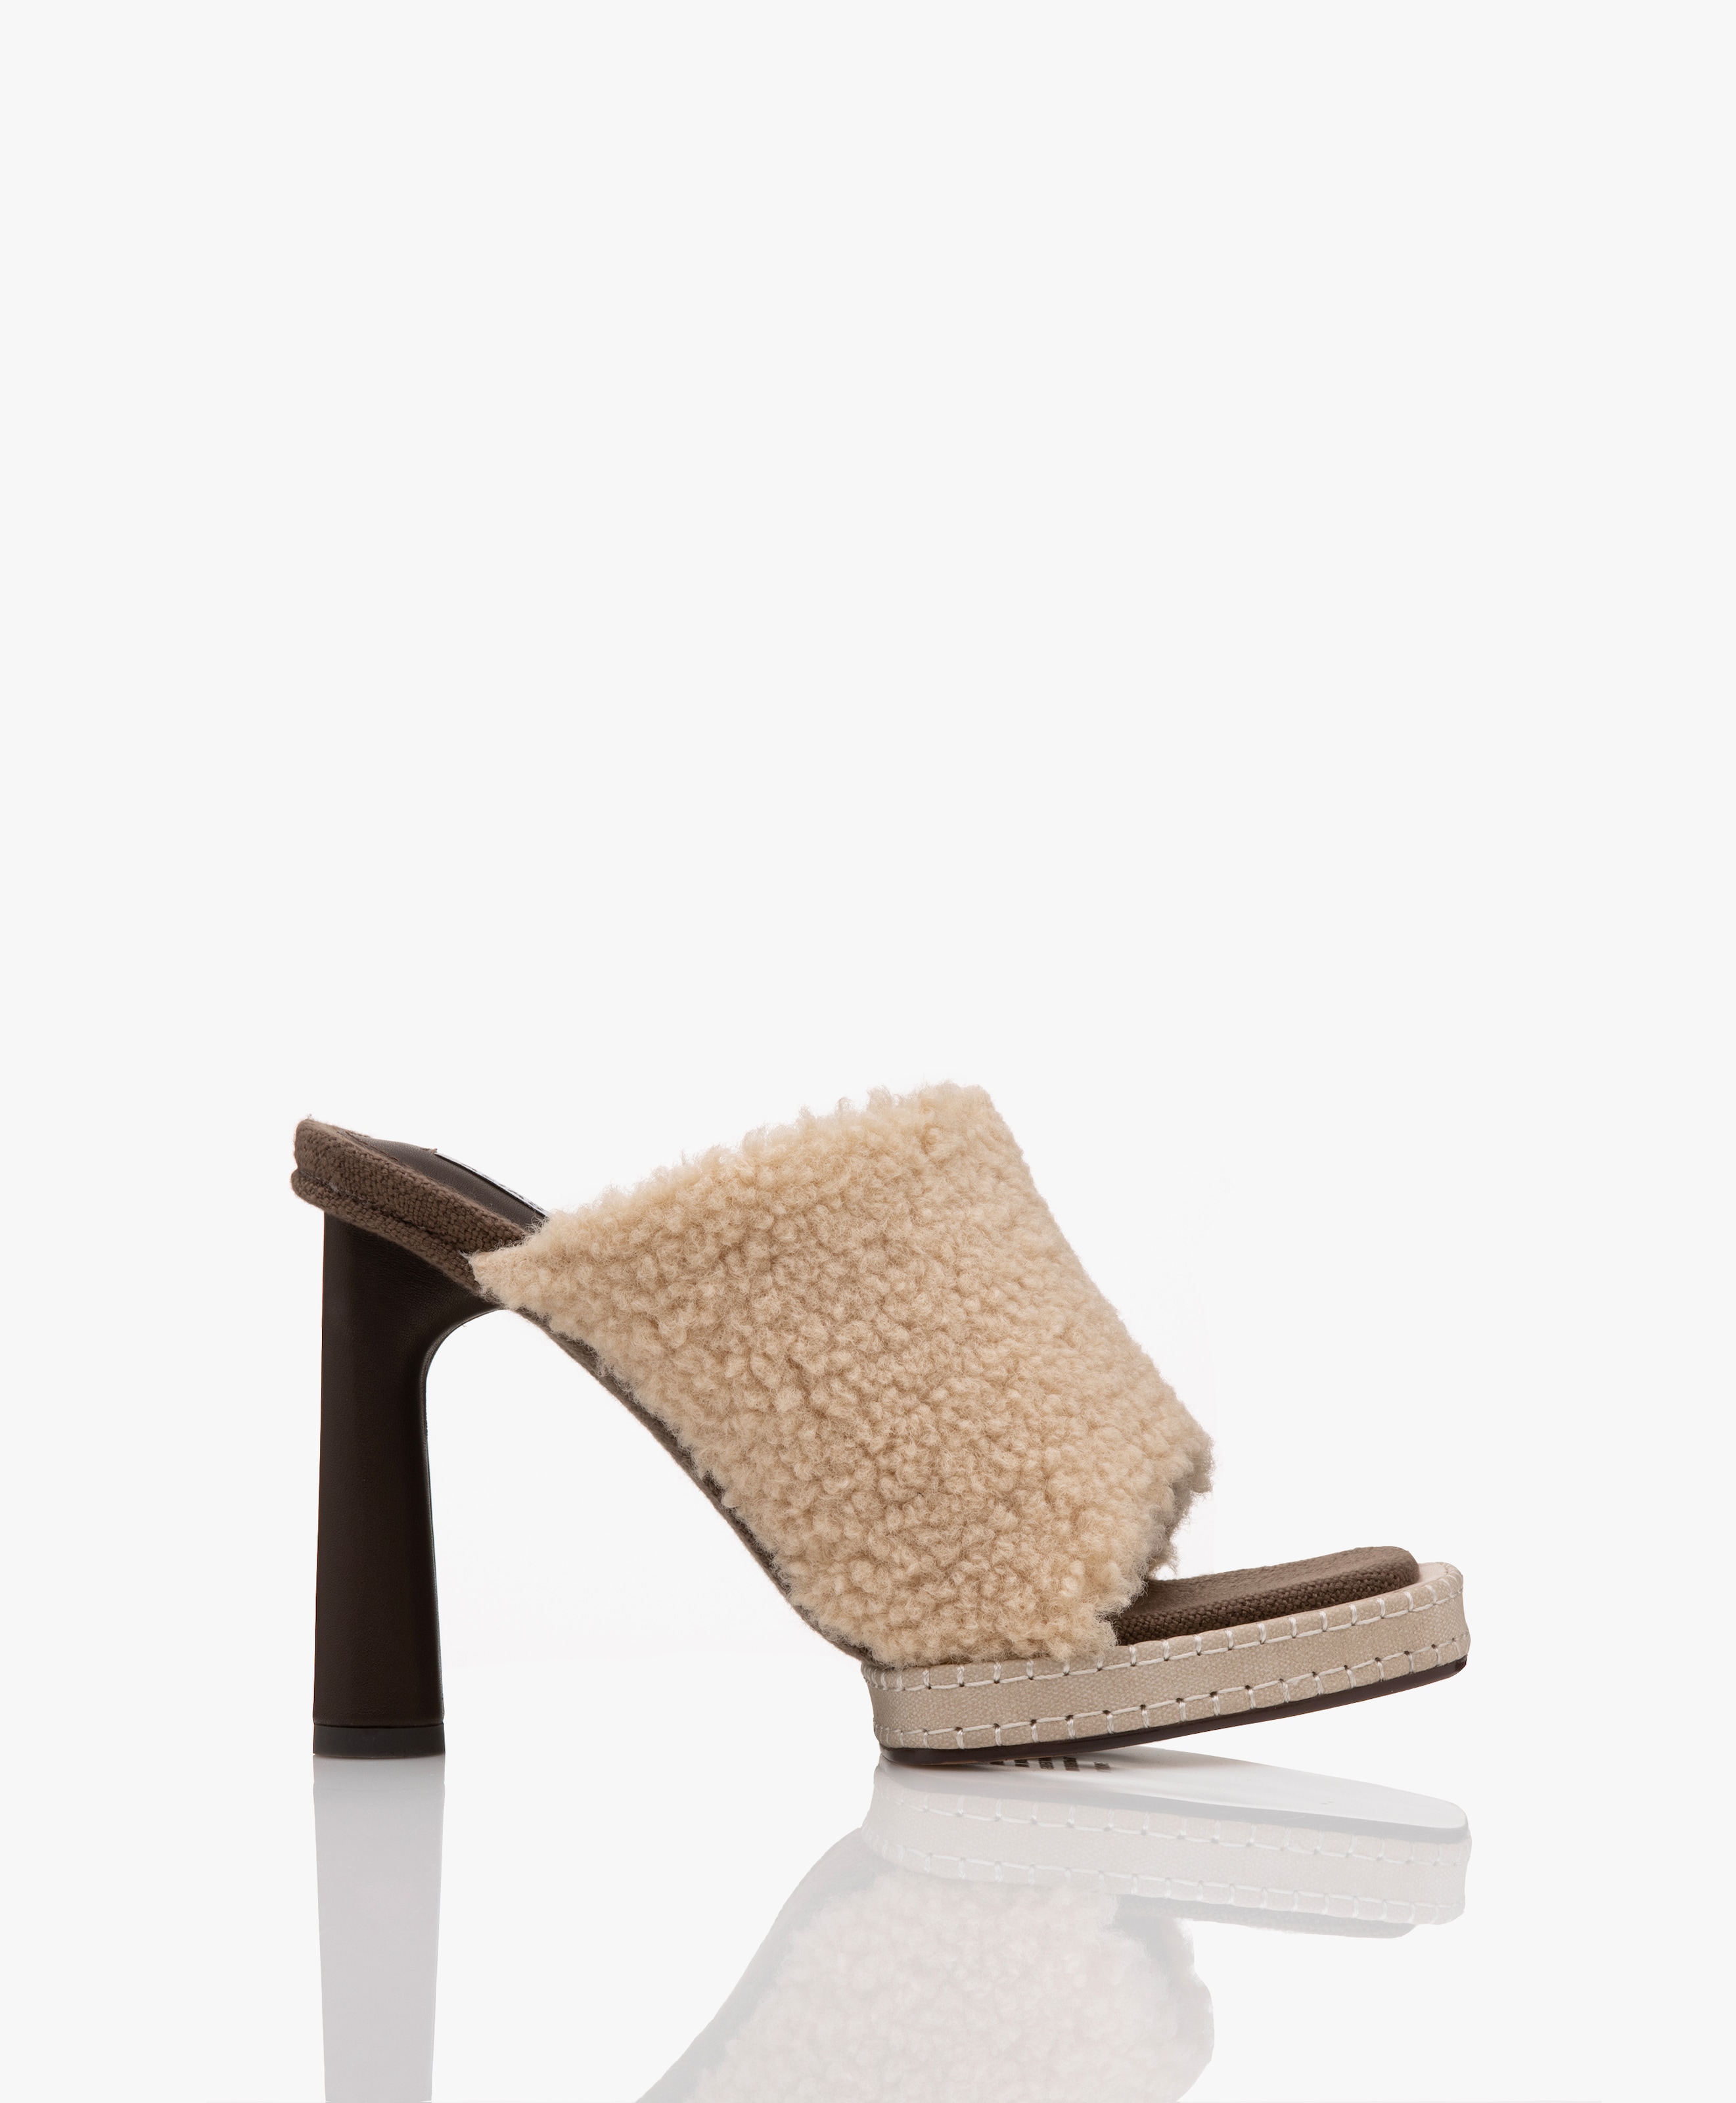 Giselle Shearling Mixed Media Mules